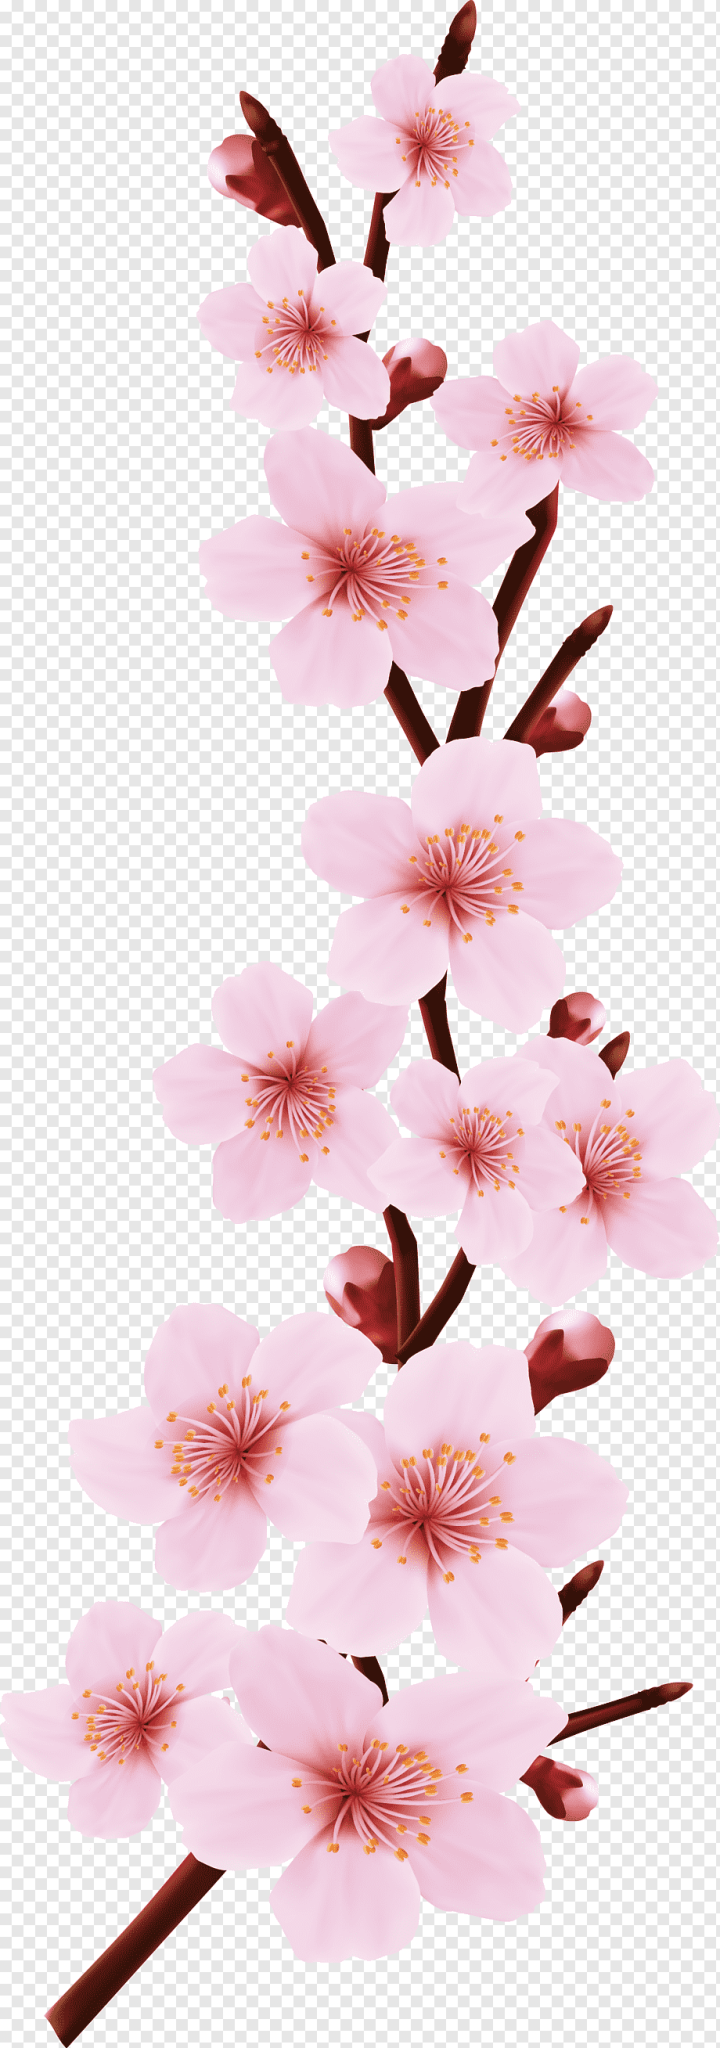 flower Arranging,branch,happy Birthday Vector Images,plant Stem,twig,flower,cherries,pink Cherry Blossoms,cherry Tree,flowers,fruit  Nut,spring,cherry Flower,pink Flowers,plant,stock Photography,petal,hand Painted,cherry Blossom,cherry Blossom Tree,cherry Blossoms,cherry Vector,design Vector,euclidean Vector,floral Design,flowering Plant,vector Material,Pink,Blossom,Drawing,Cherry,design,png,transparent,free download,png